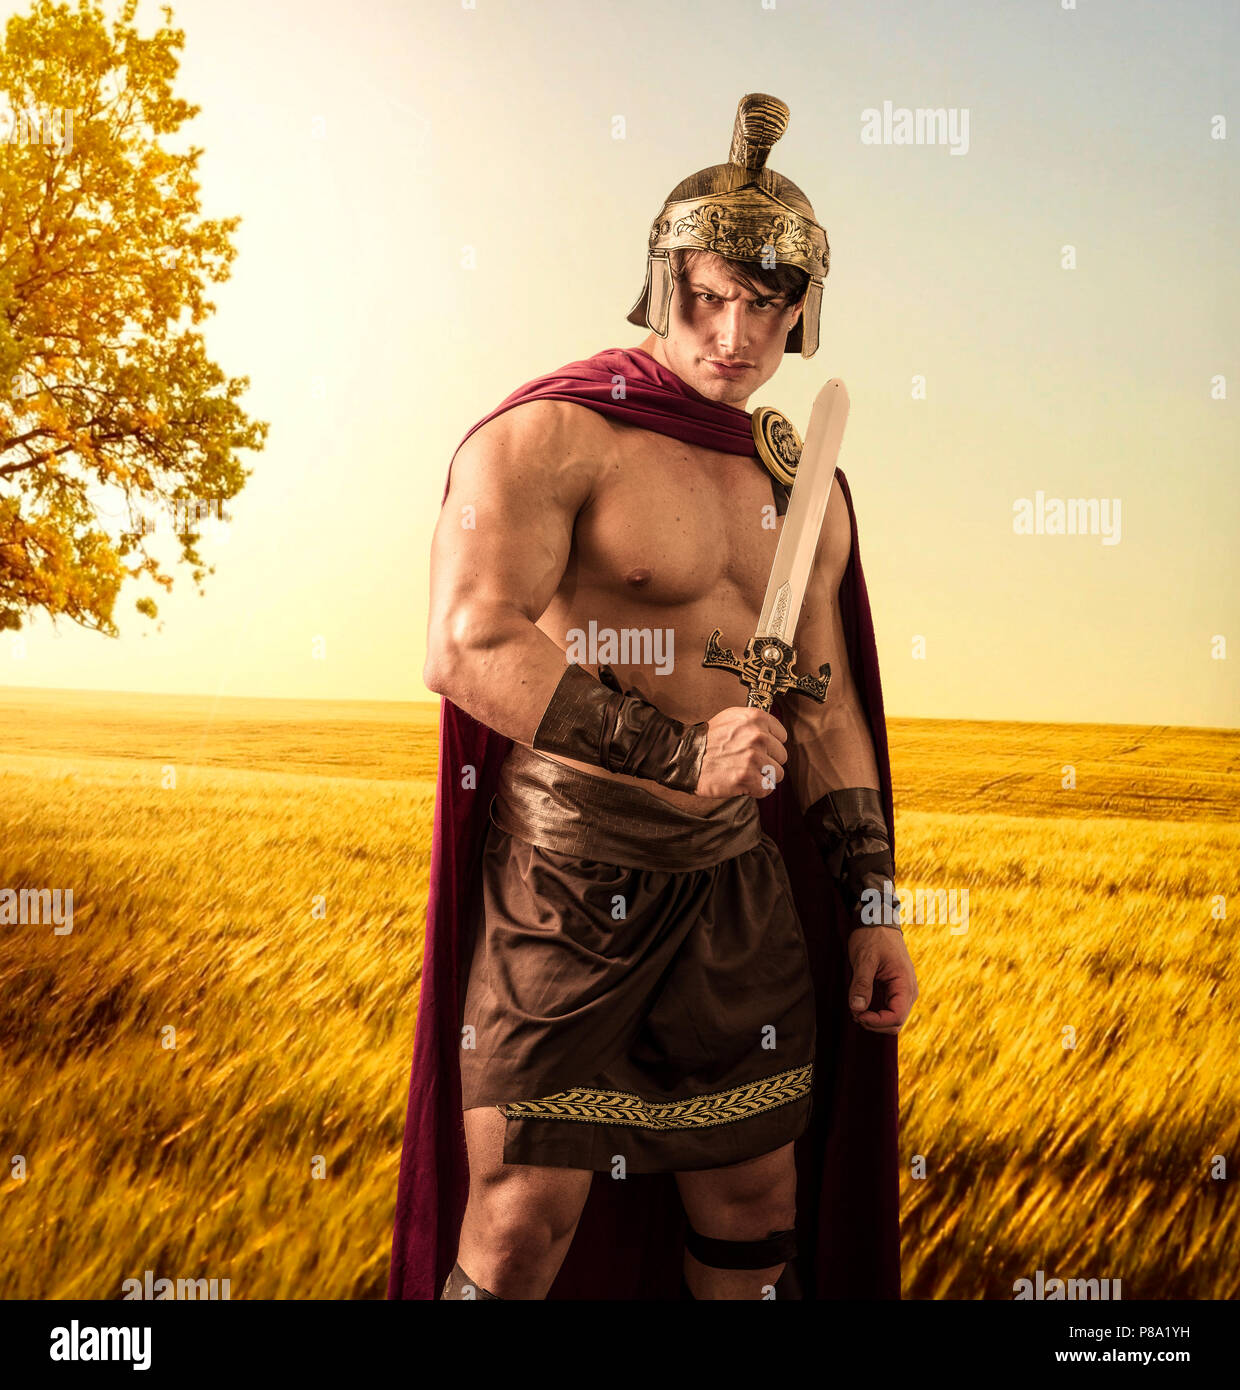 Young muscular man posing in gladiator costume Stock Photo